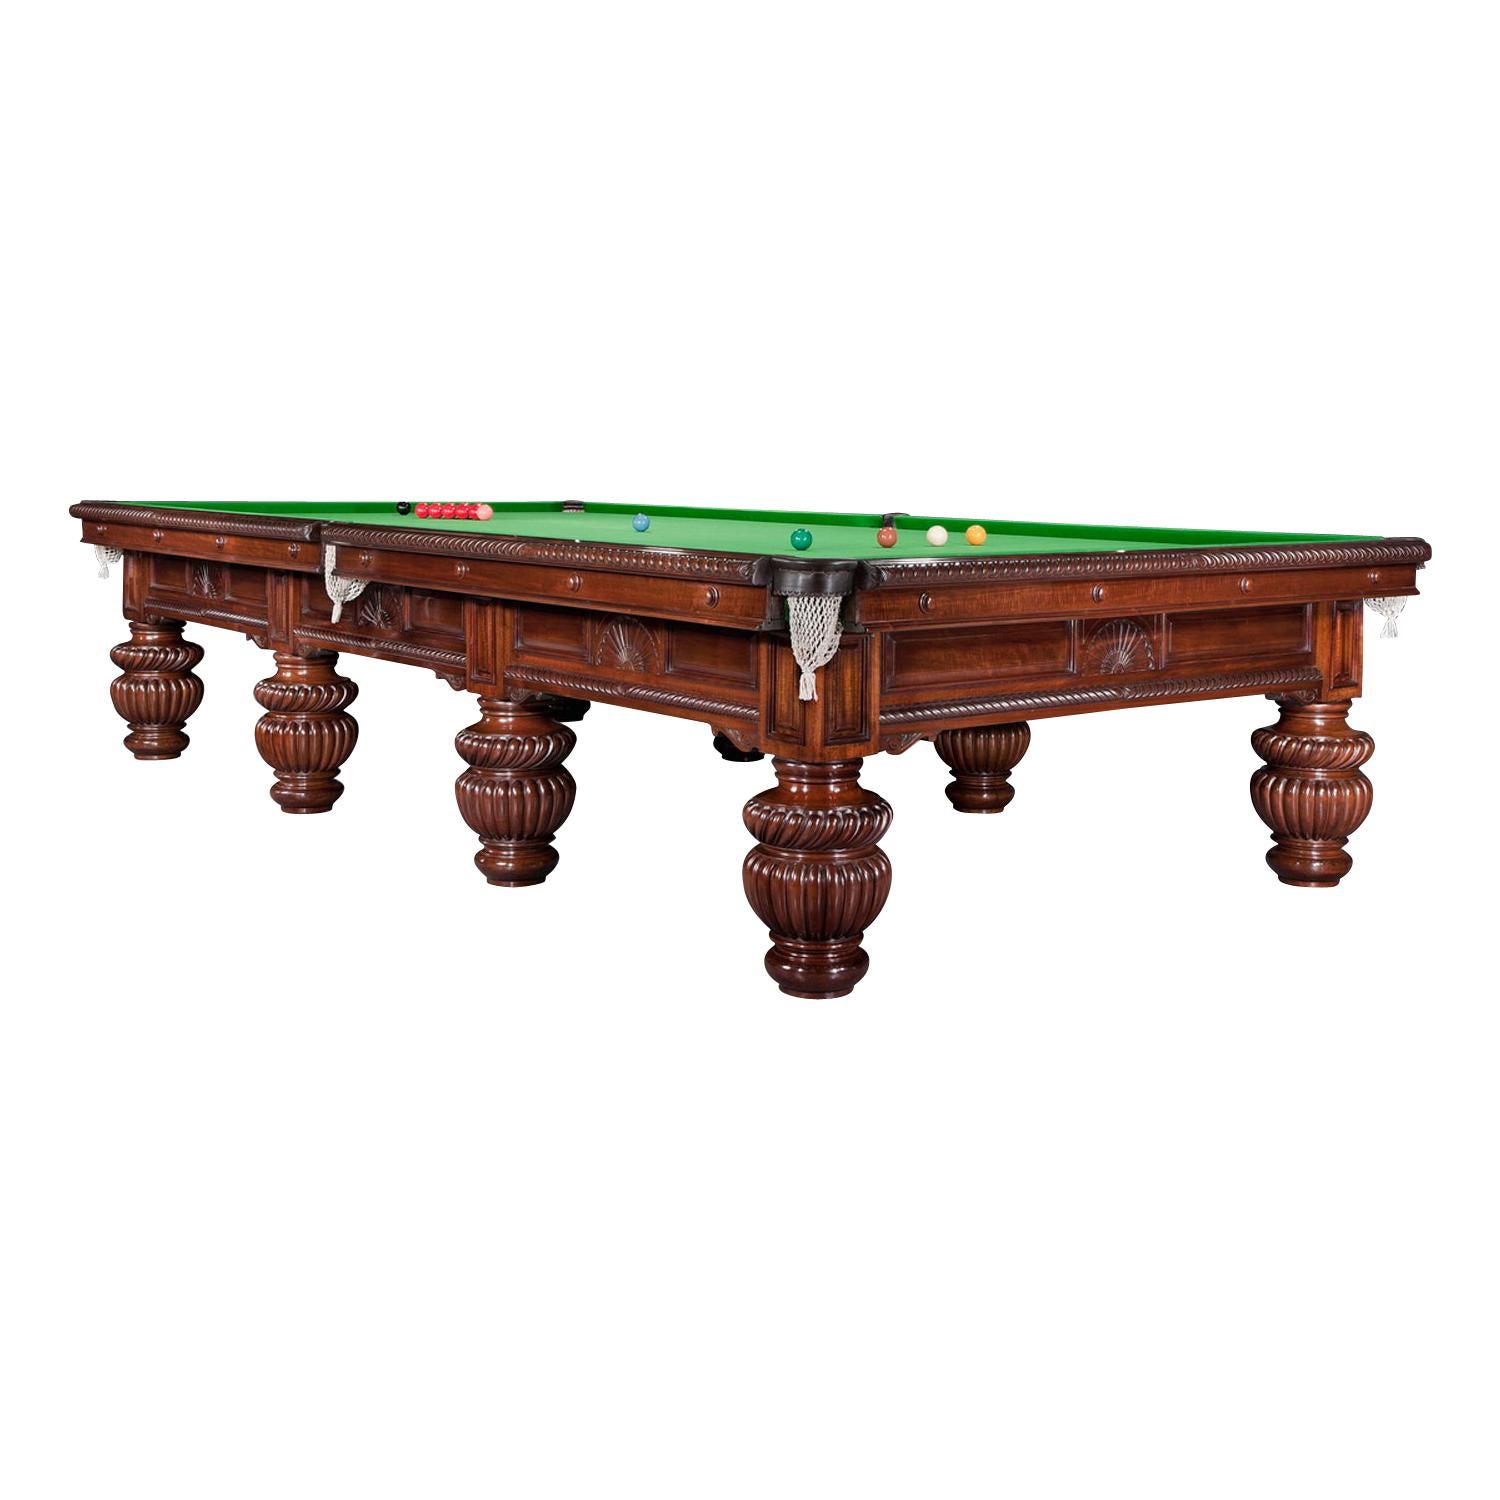 Billiard Snooker Pool Table Victorian Decorative Burroughes and Watts London For Sale